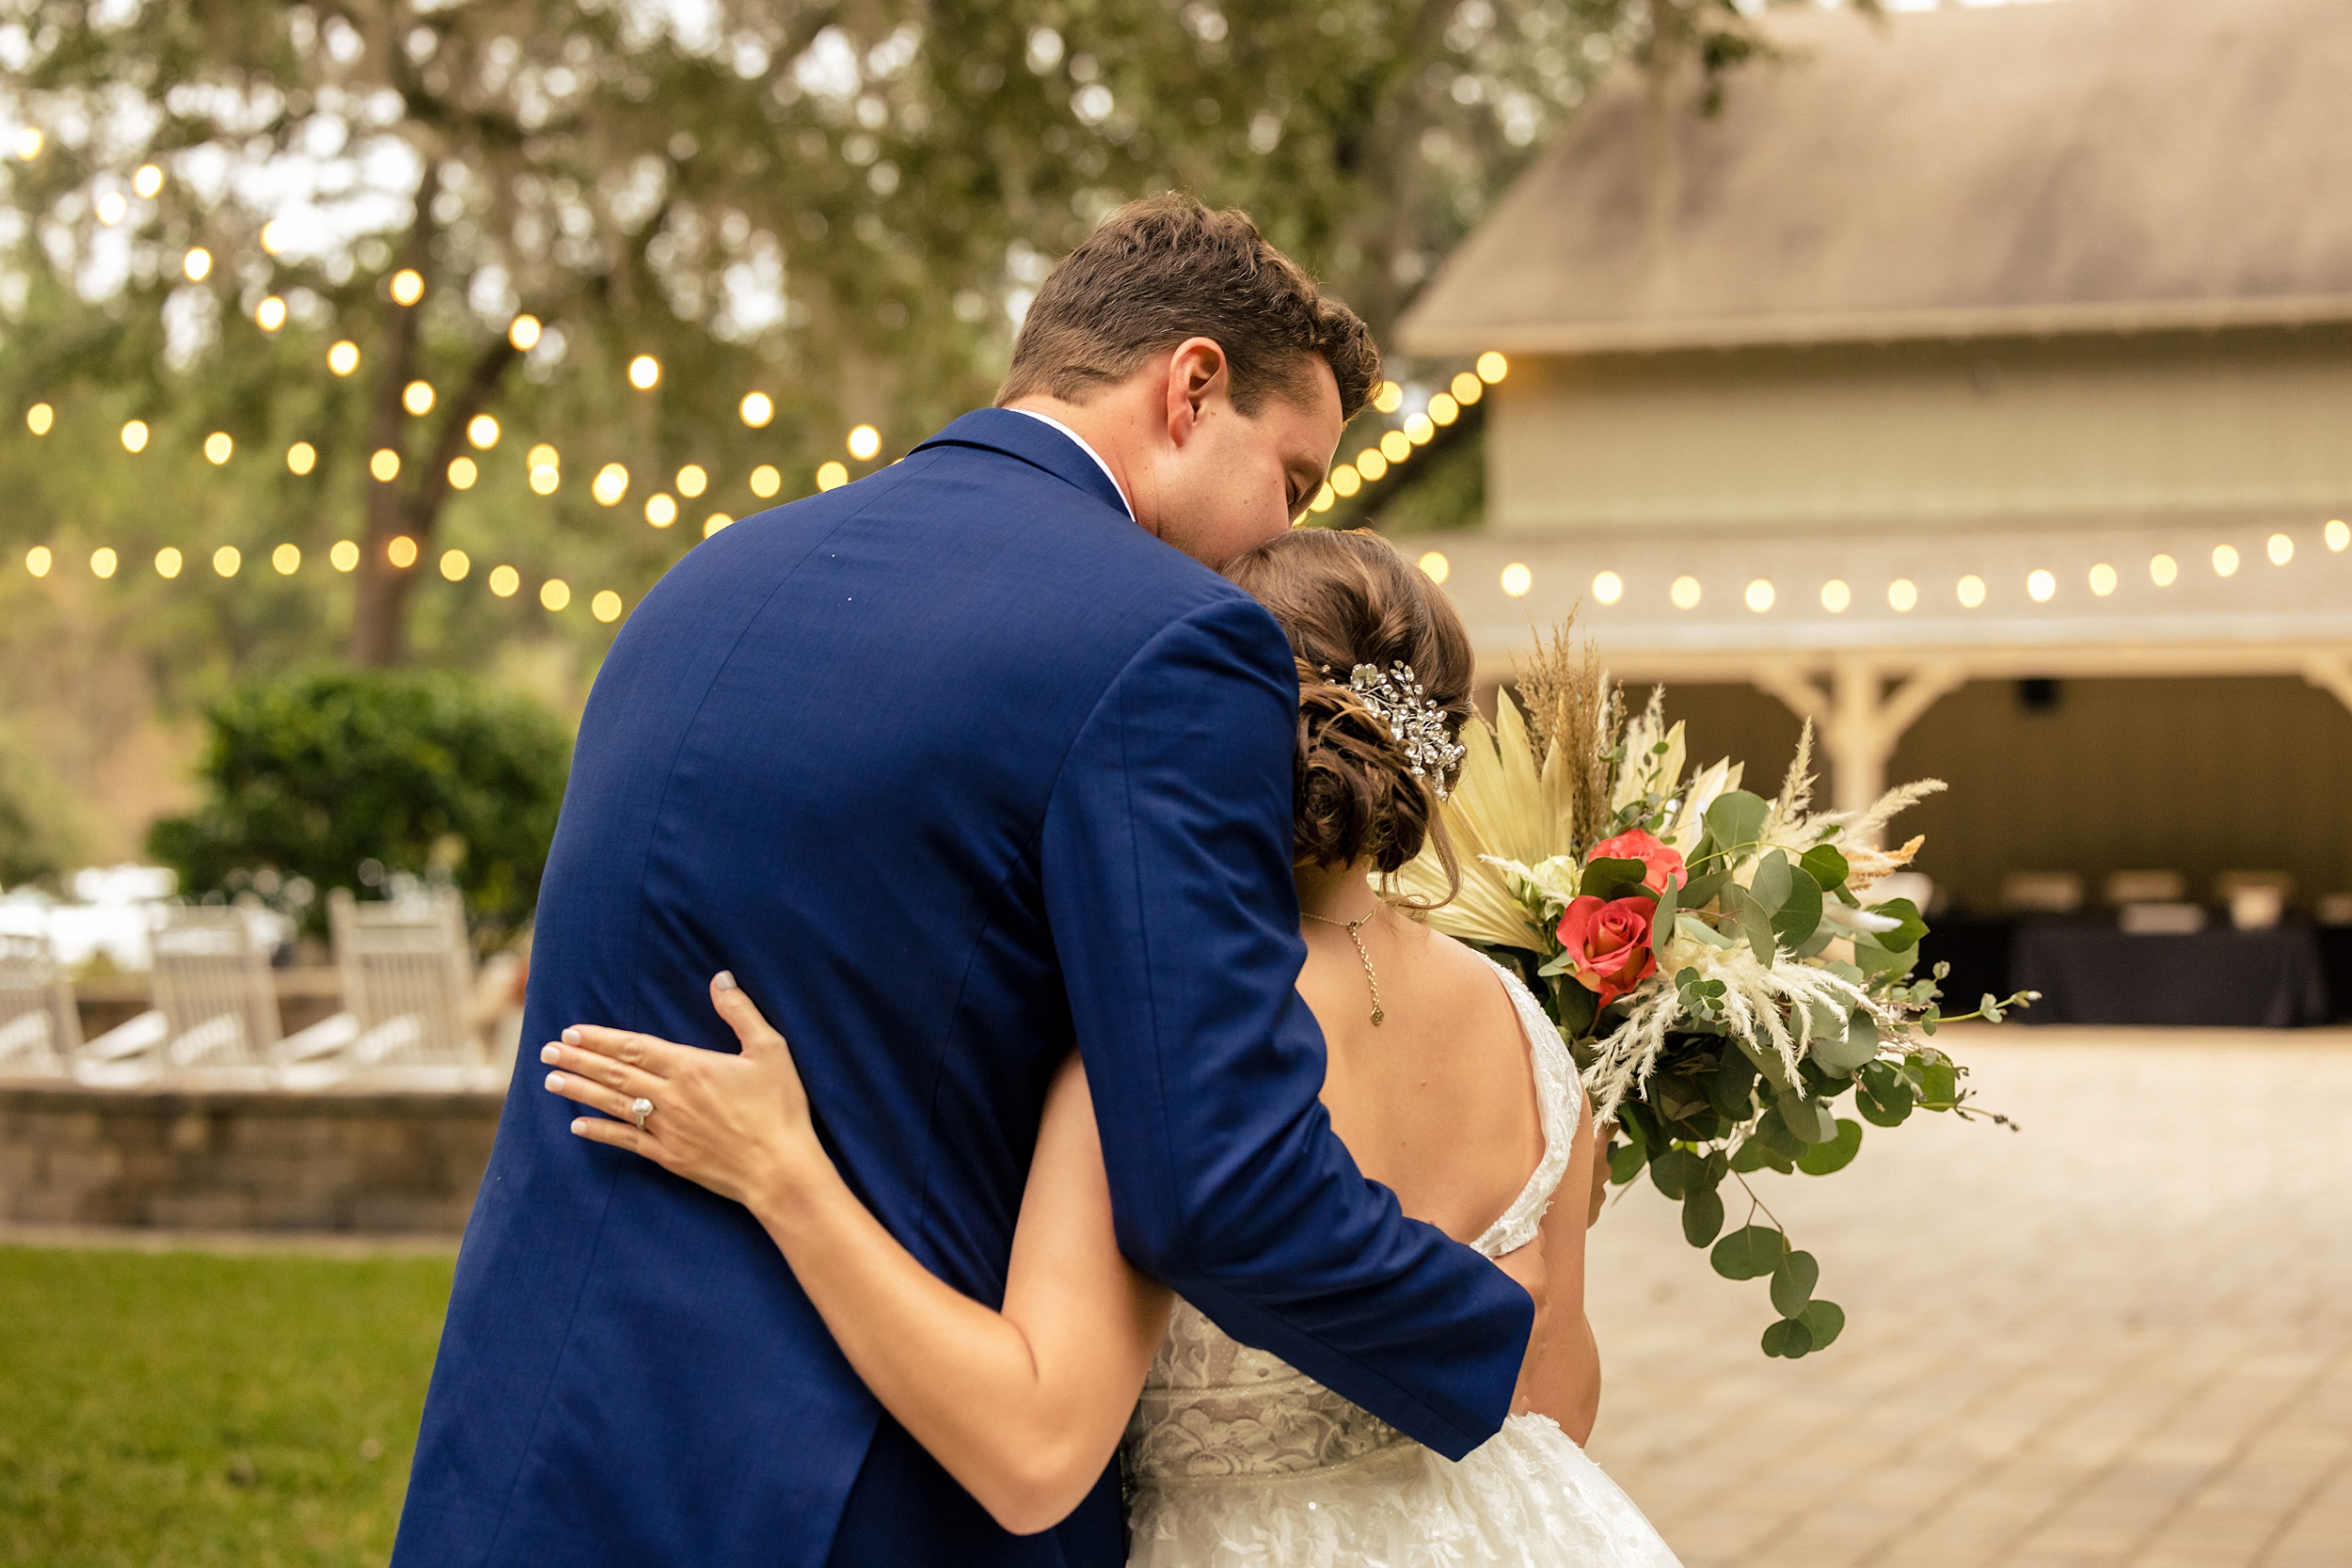 Newlyweds stand together with arms around each other on the patio of their wedding venue